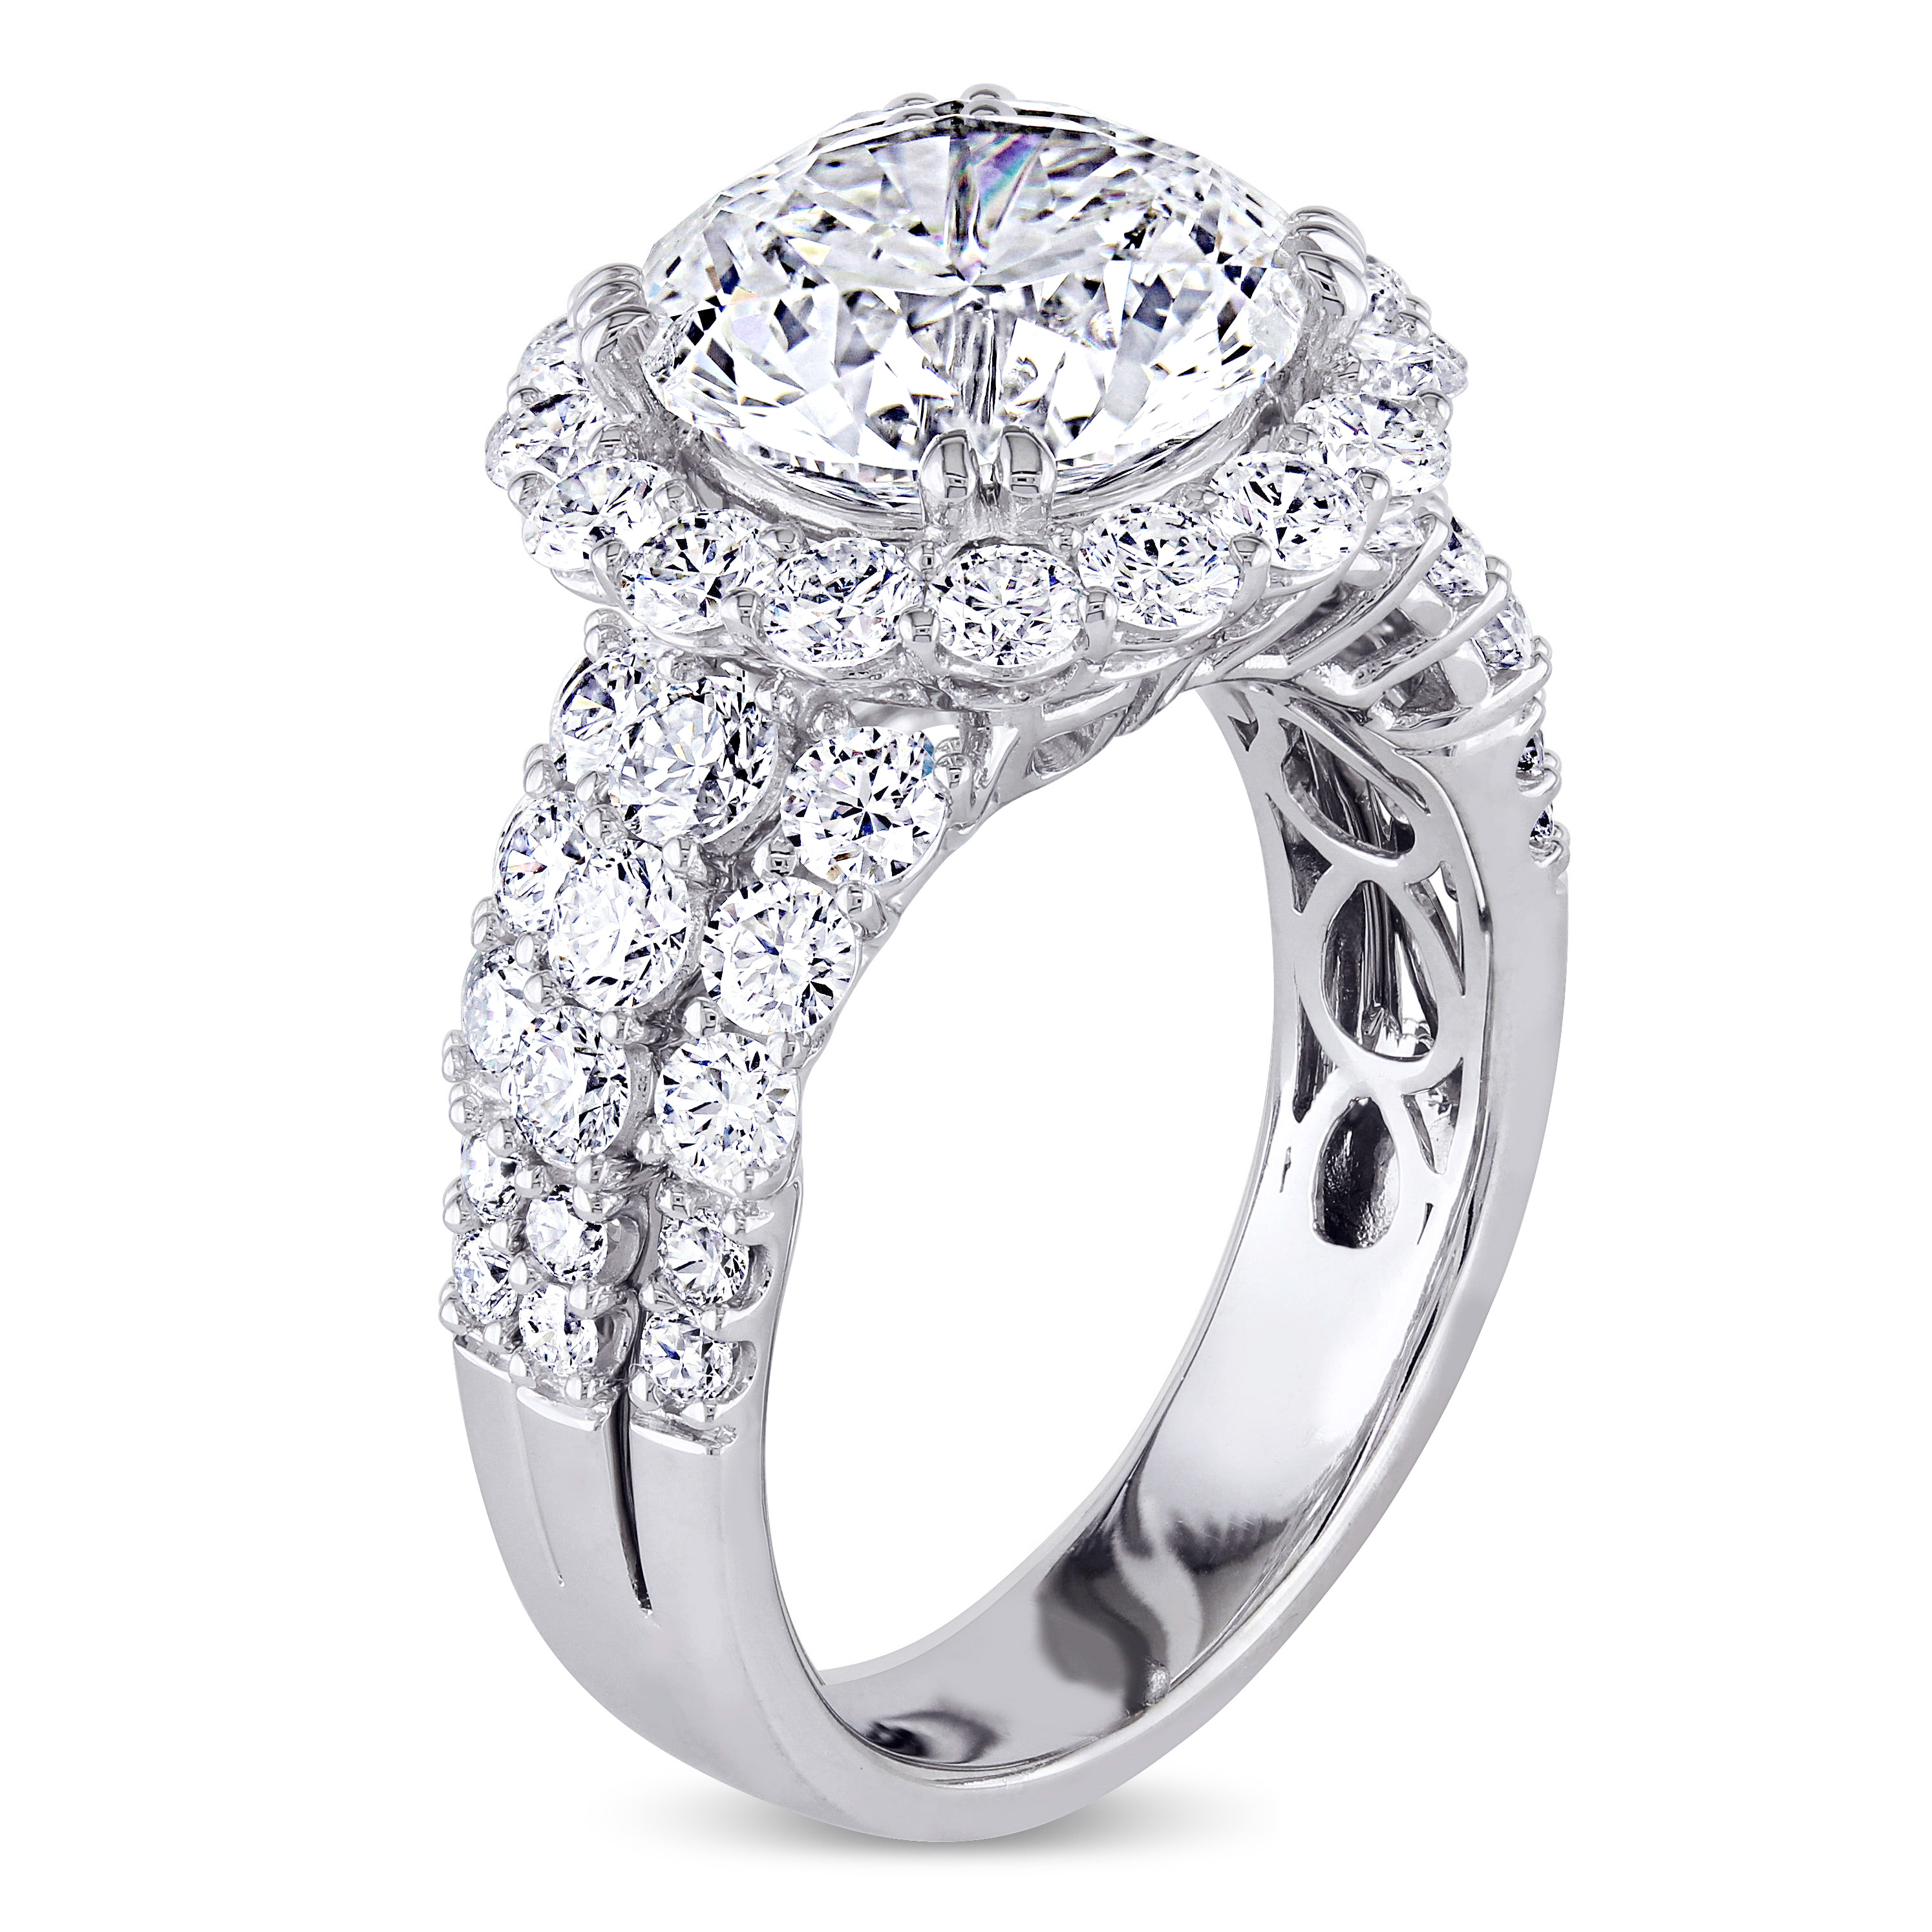 6 1/4 CT TW Diamond Halo Engagement Ring in 18k White Gold